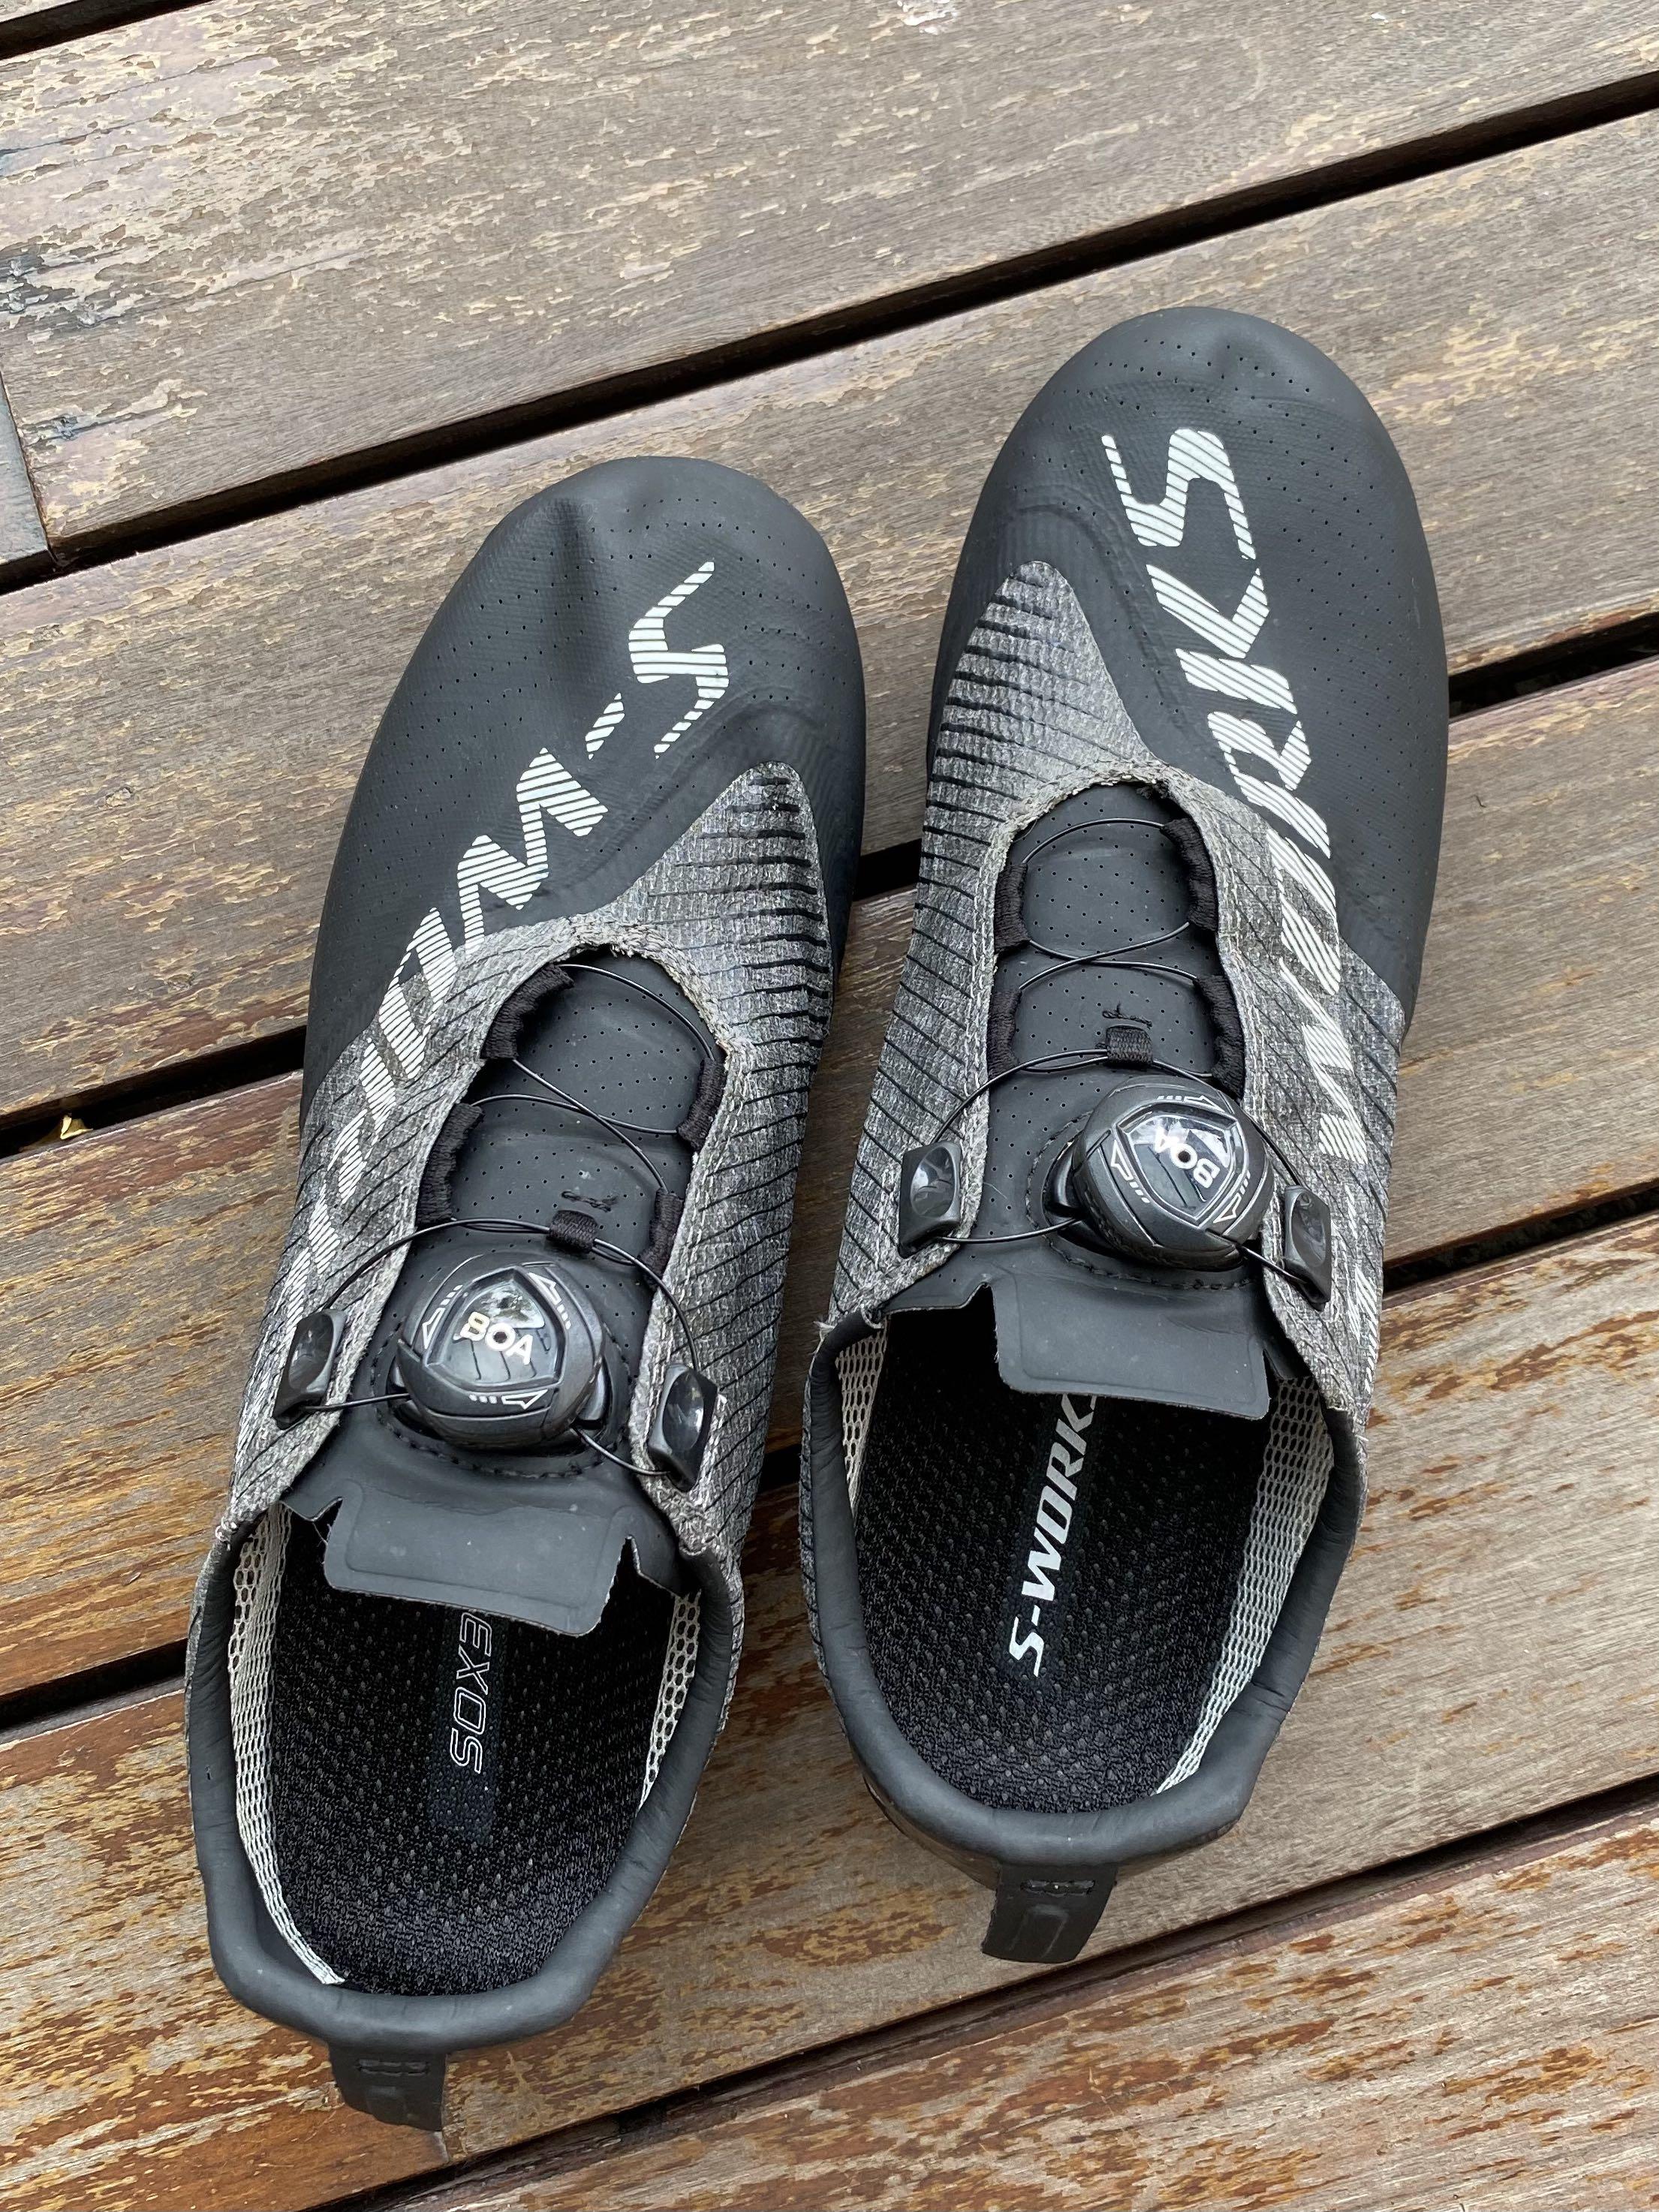 S-WORKS EXOS ROAD SHOES 41 - ウェア